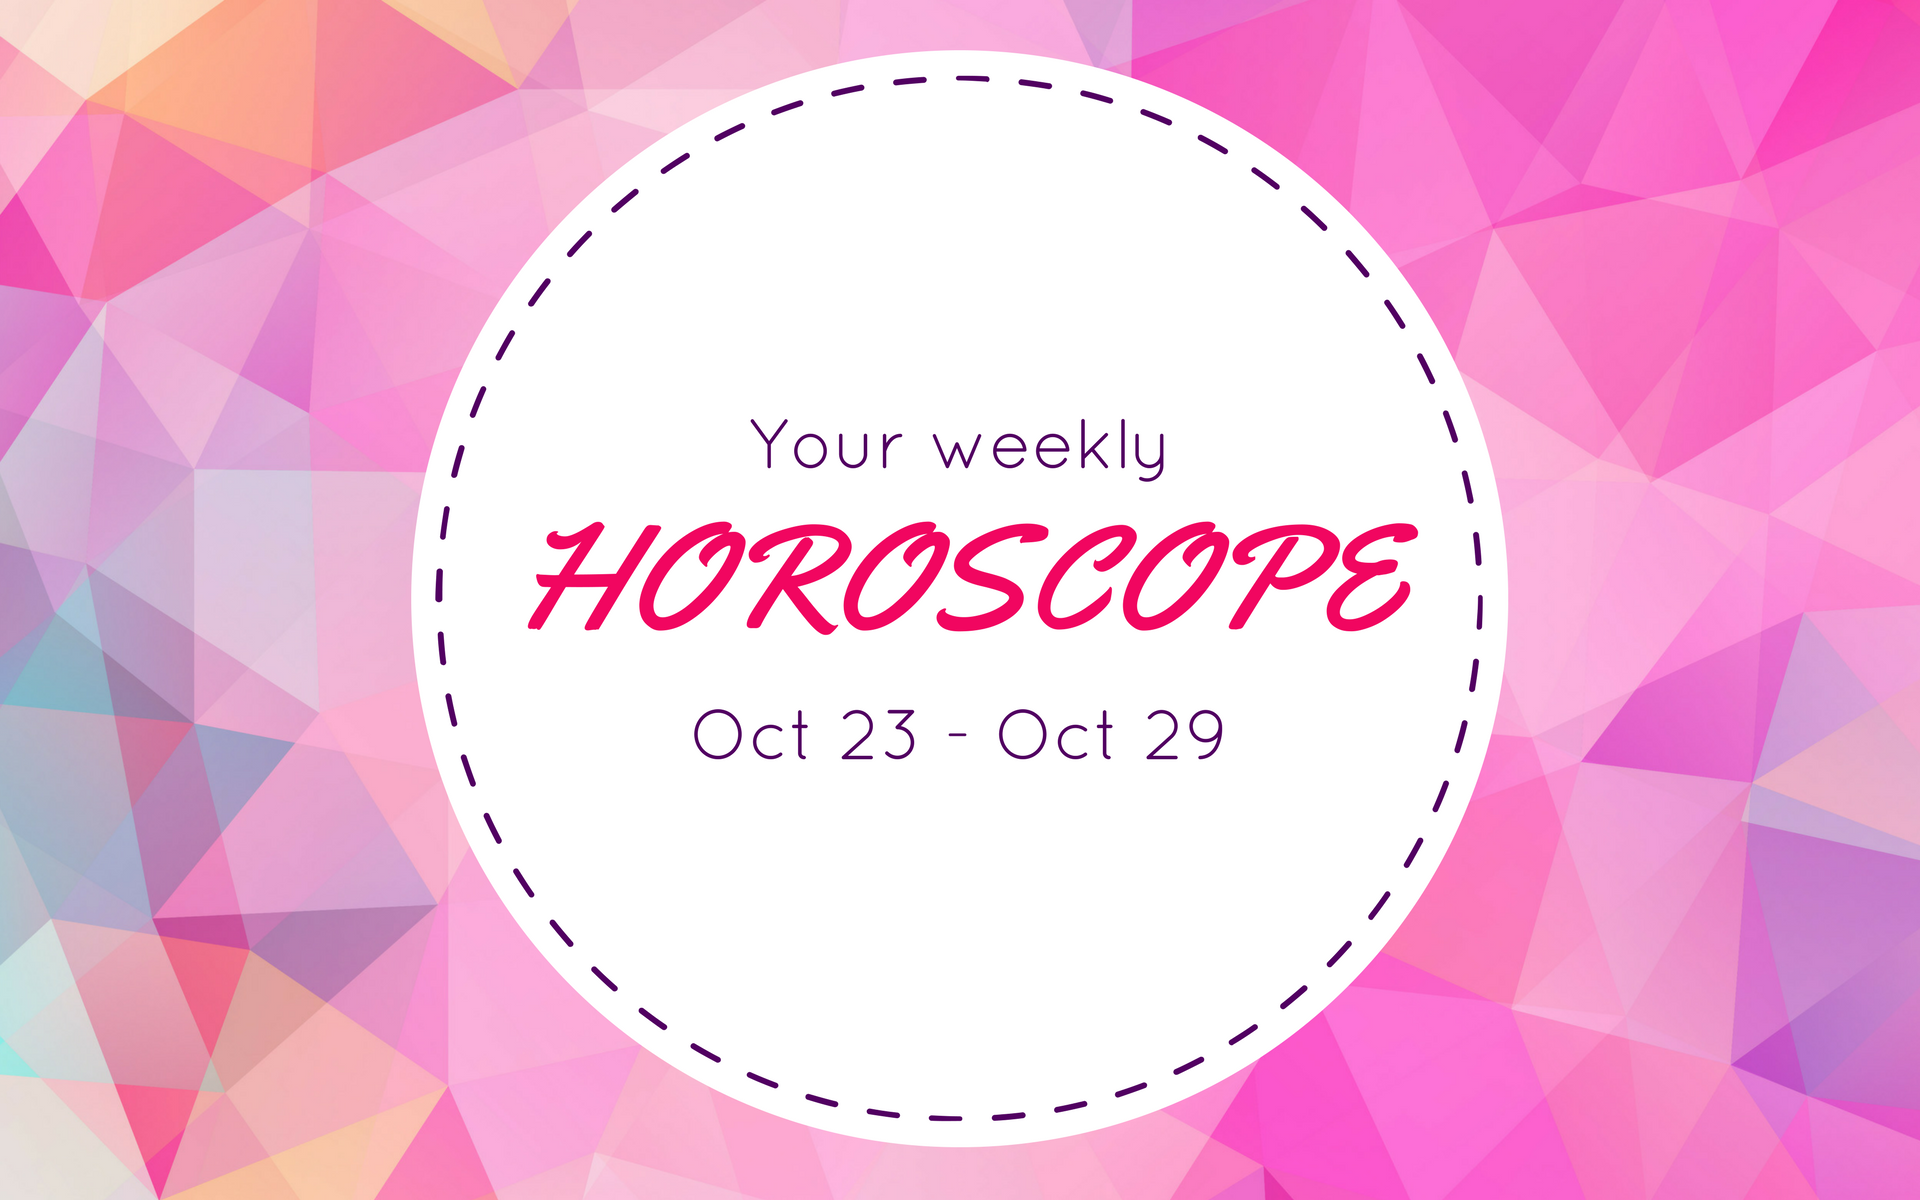 Your Weekly Horoscope: Oct 23 - Oct 29